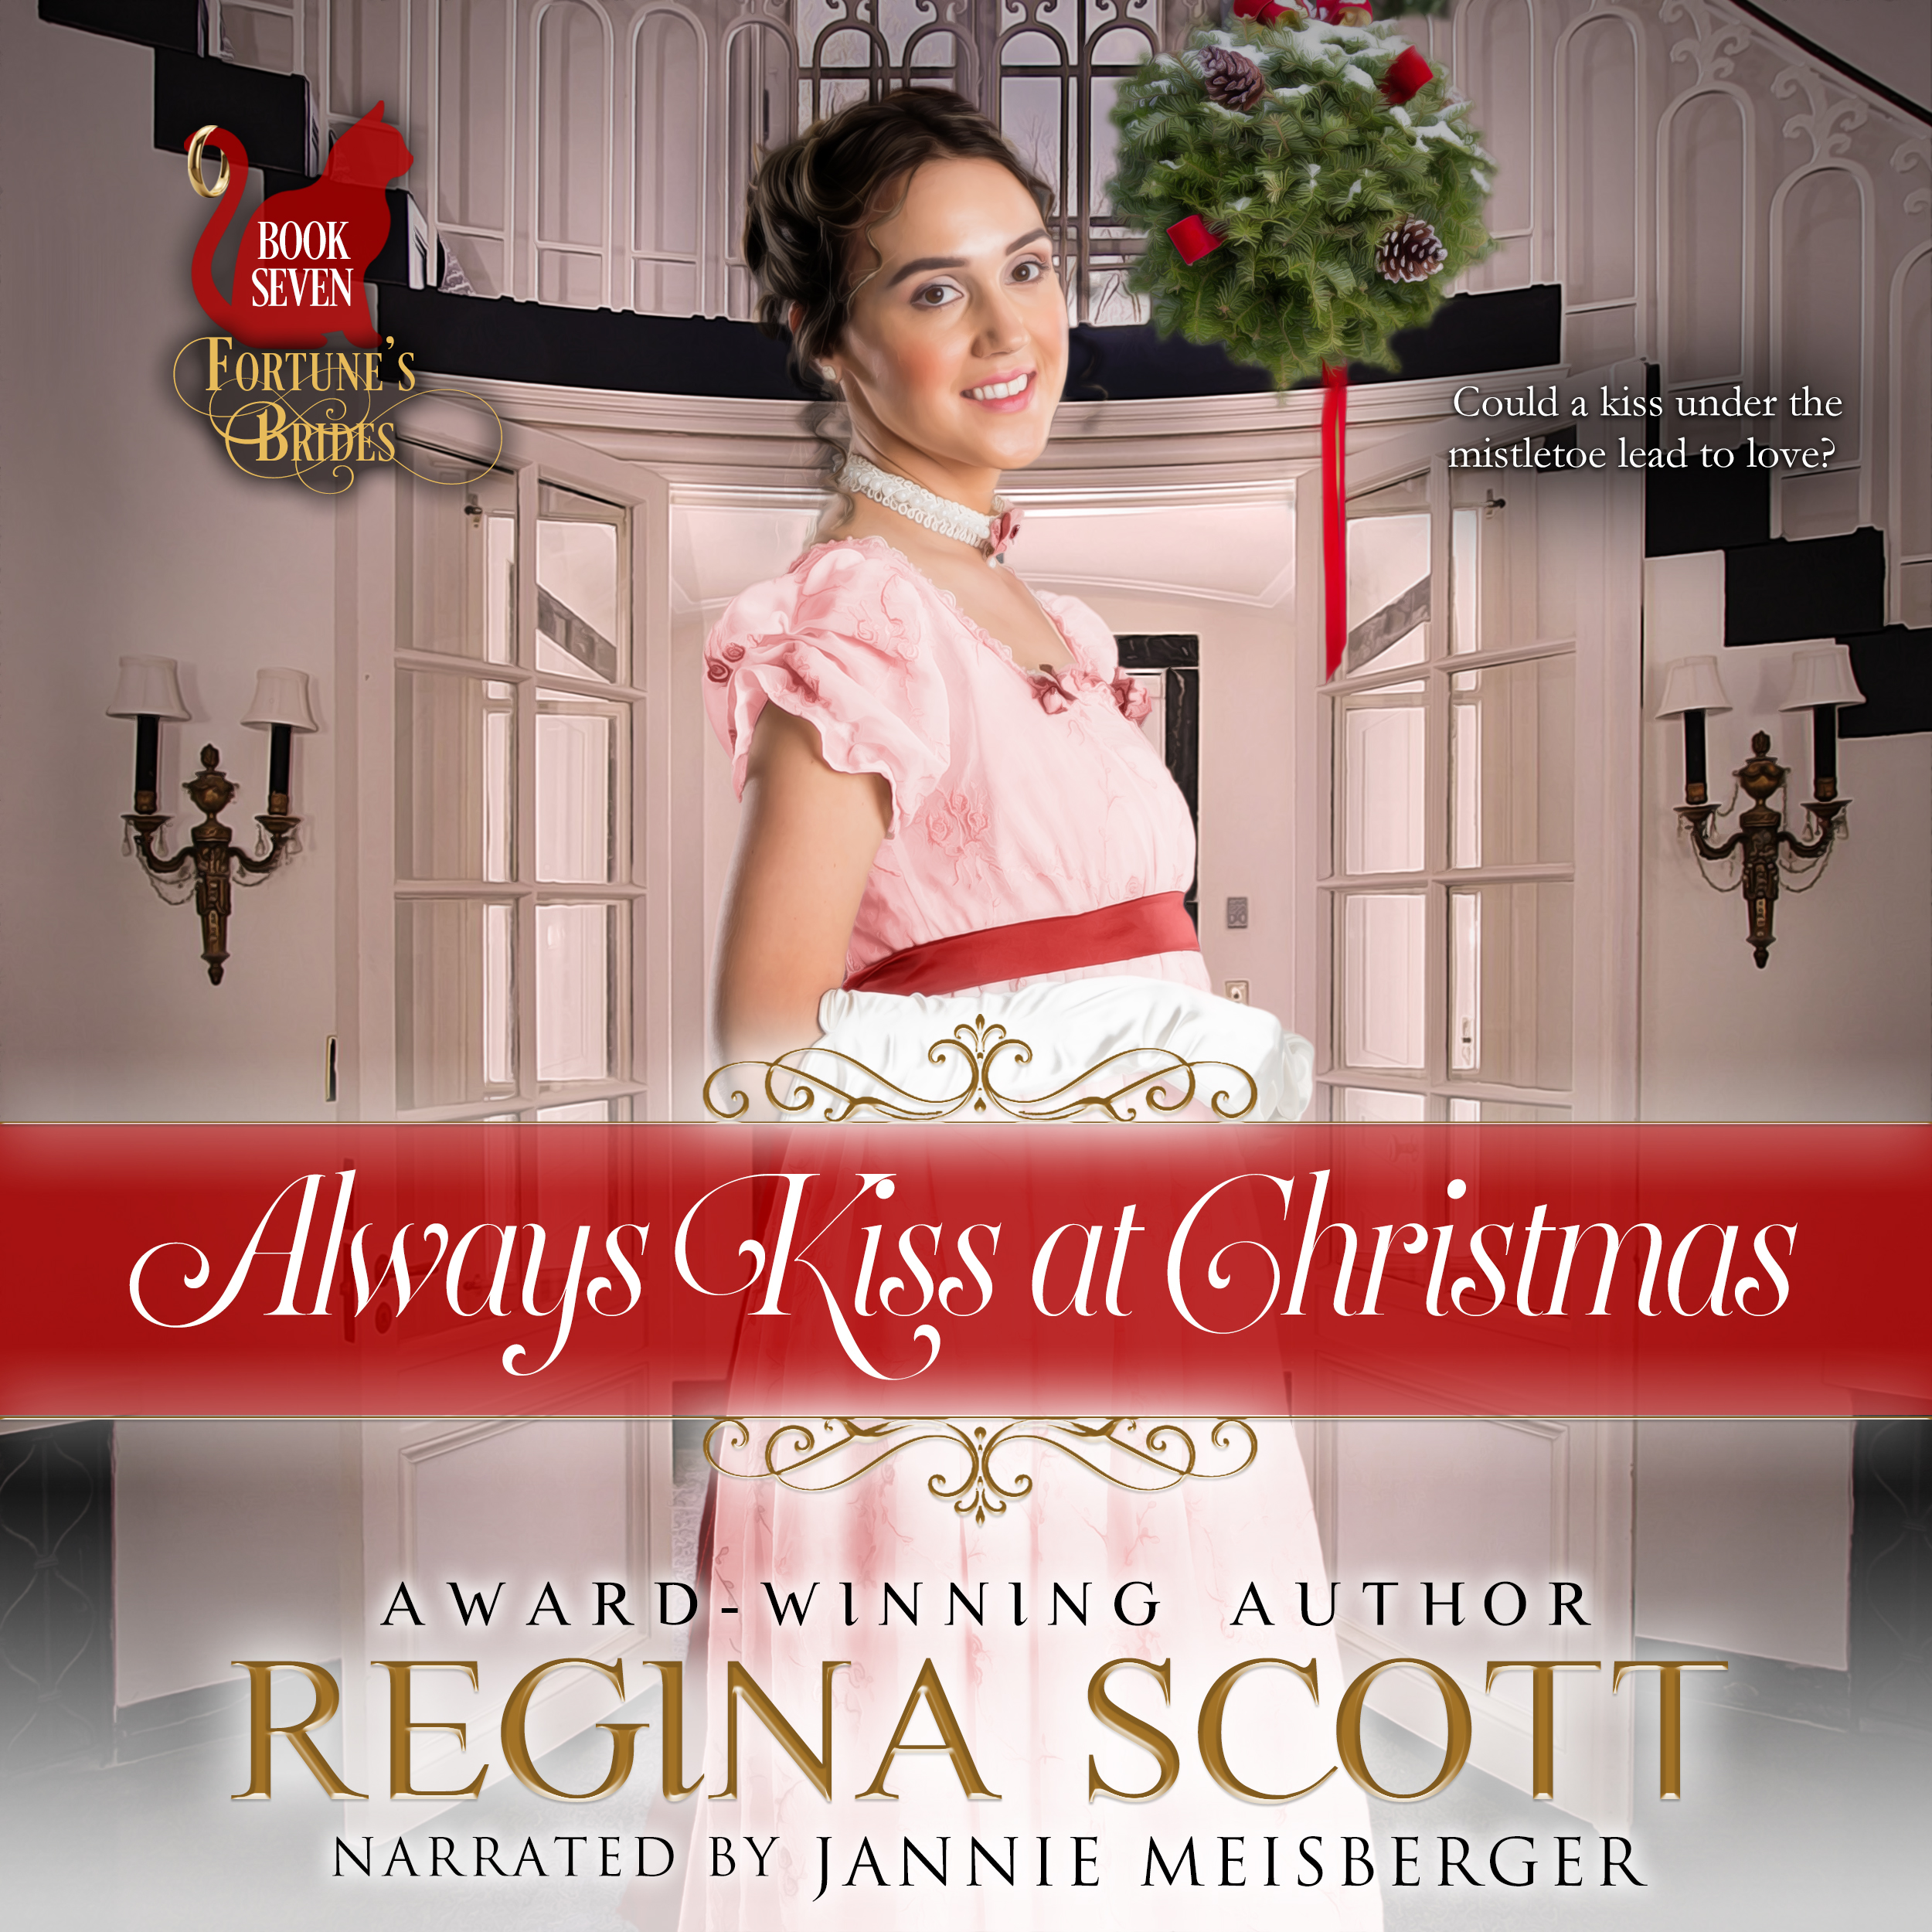 audio book for Always Kiss at Christmas by Regina Scott, book 7 and the prequel in the Fortune's Brides series